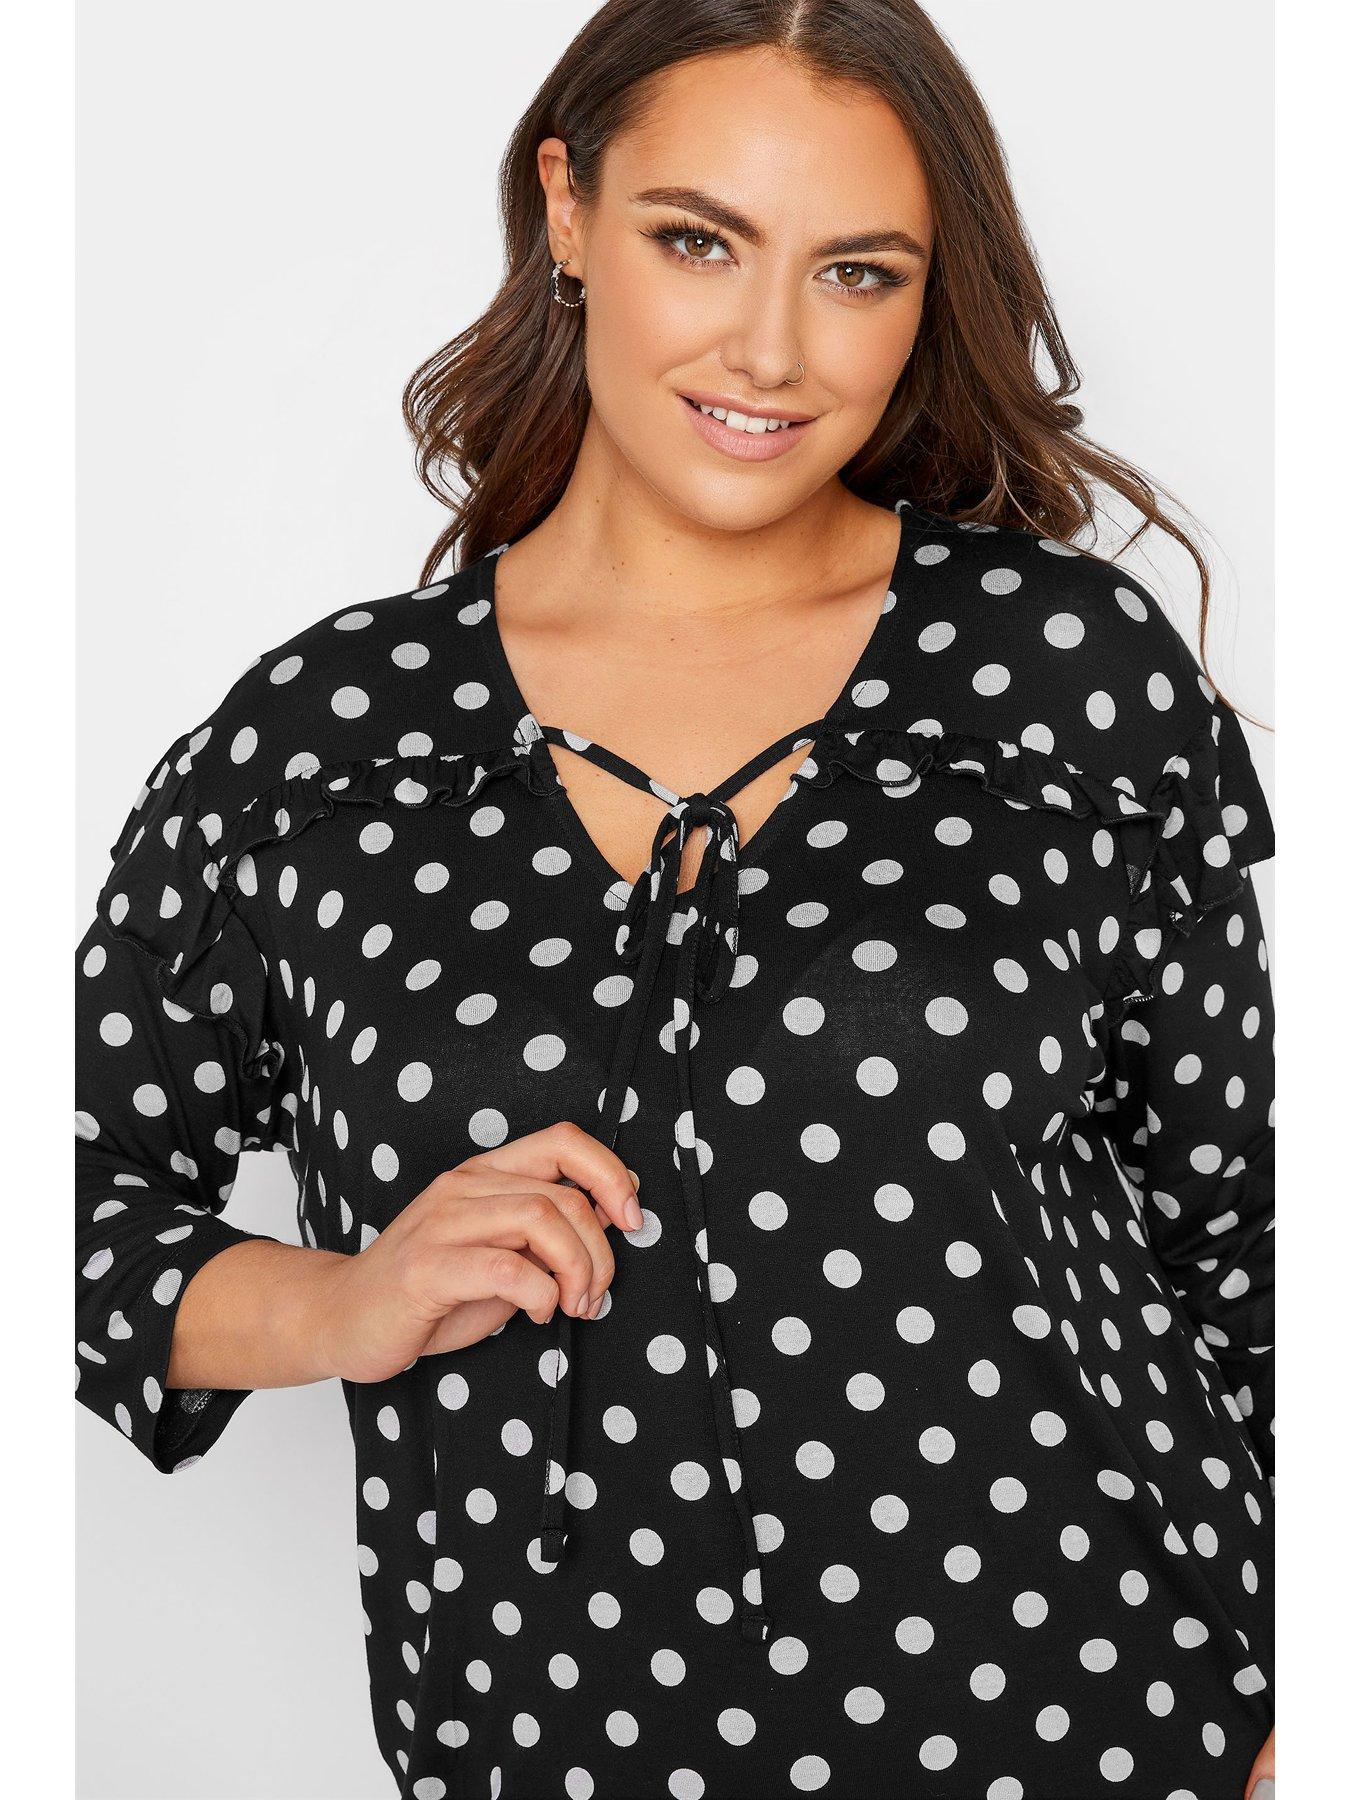  Clothing Spot Top With Front Cord Detail